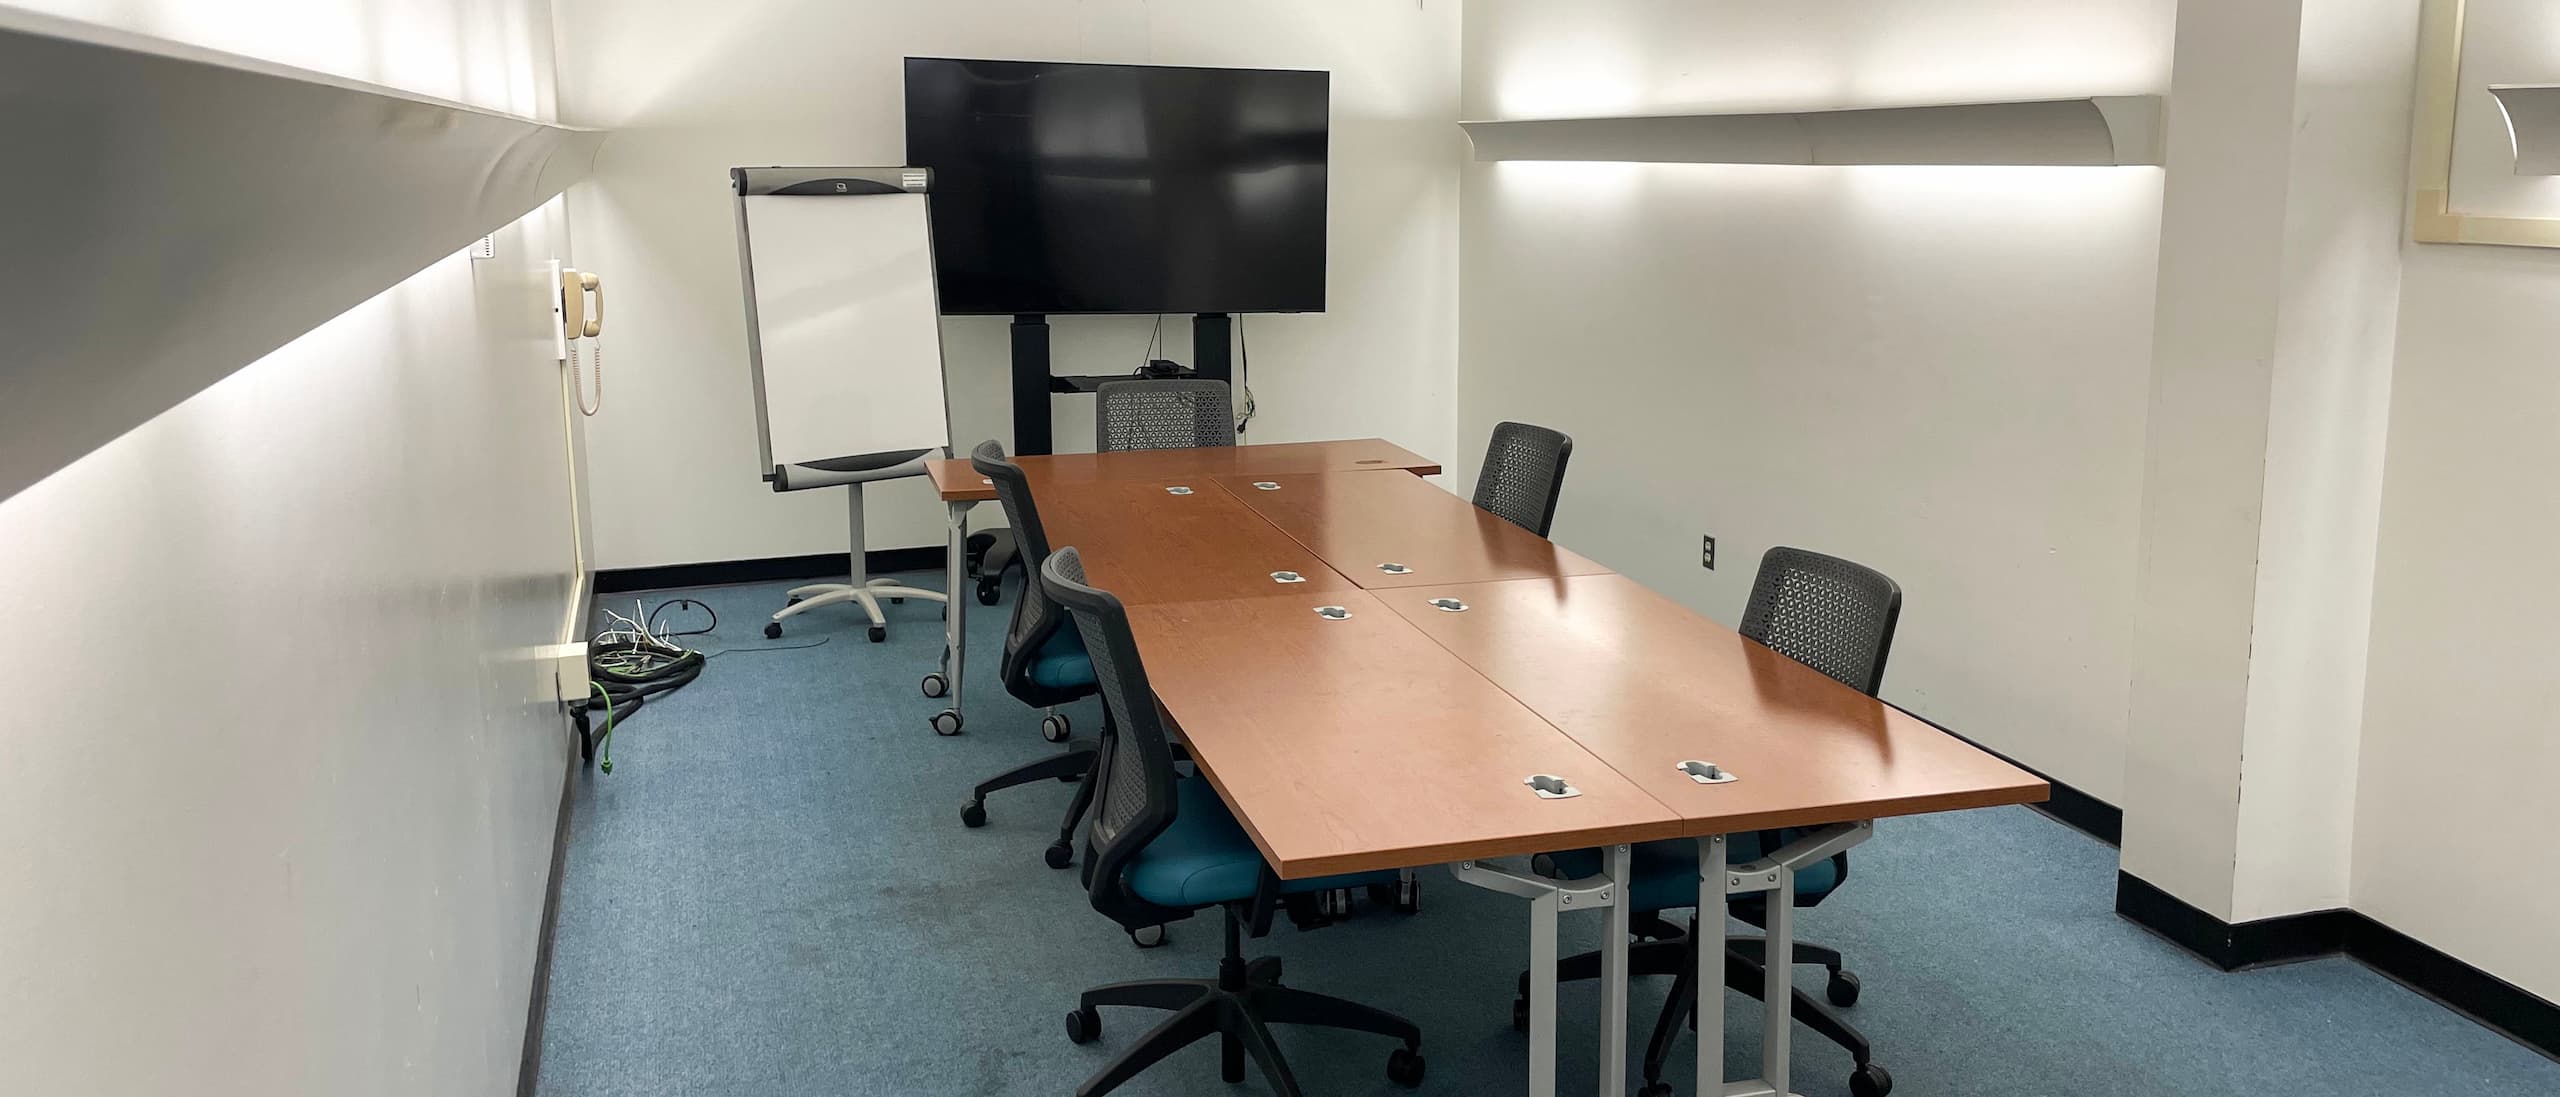 Picture of meeting room which includes table, 4 chairs, display, and whiteboard.